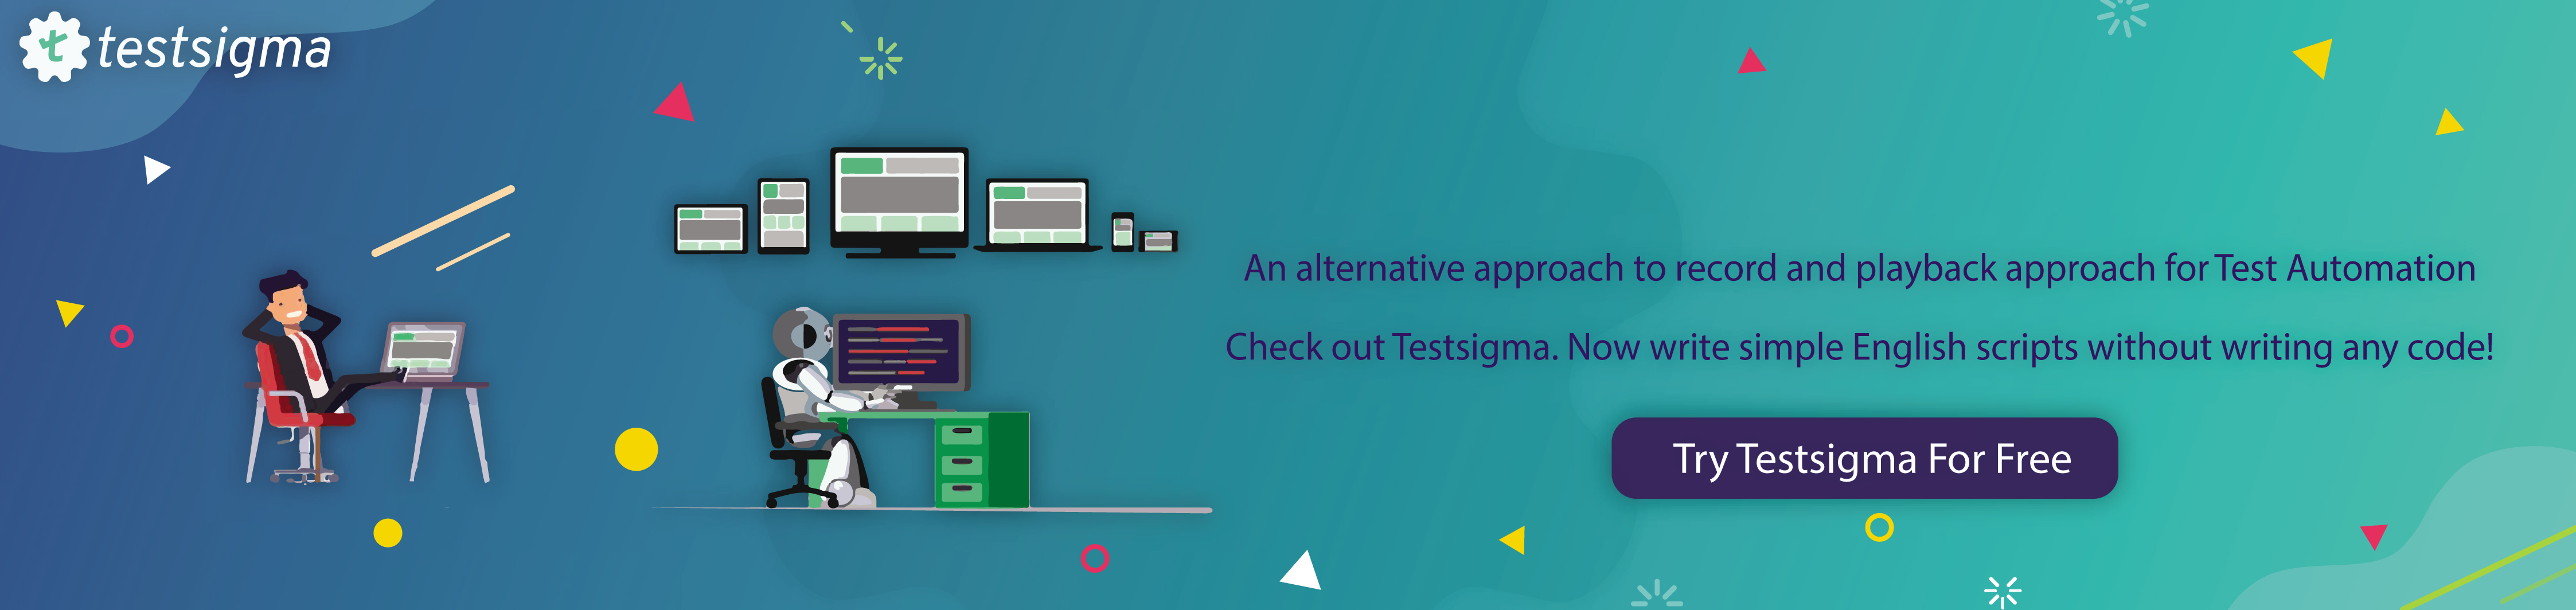 Alternative approach to Record and Play approach_Testsigma